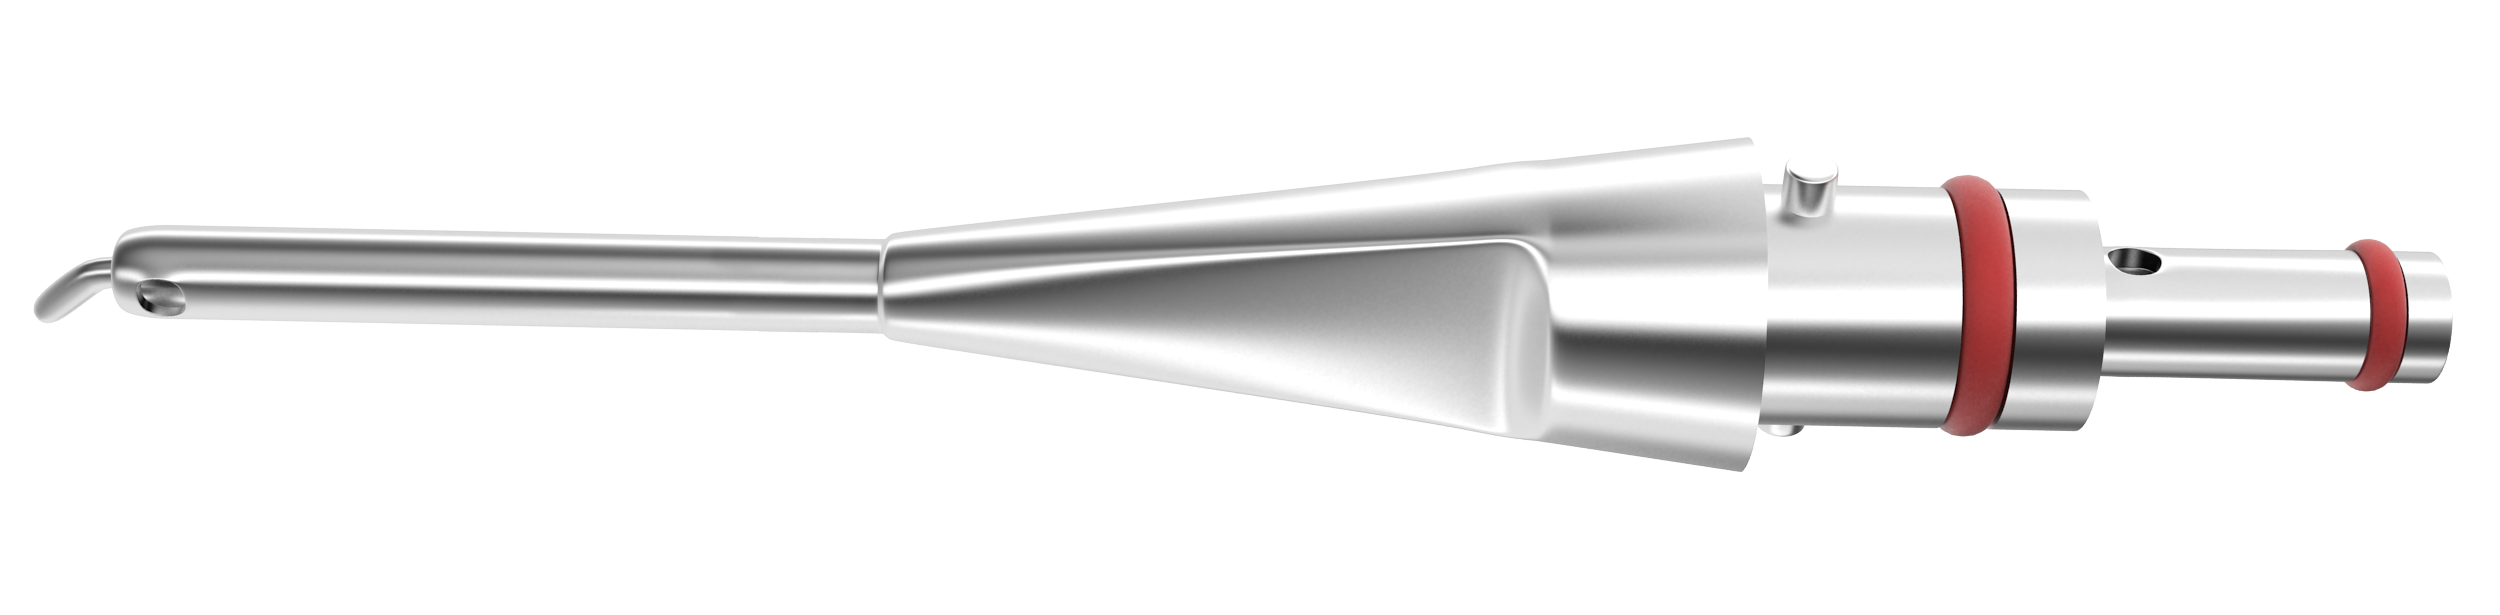 479R 7-080/45 I/A Tip, Angled 45°, Stainless Steel